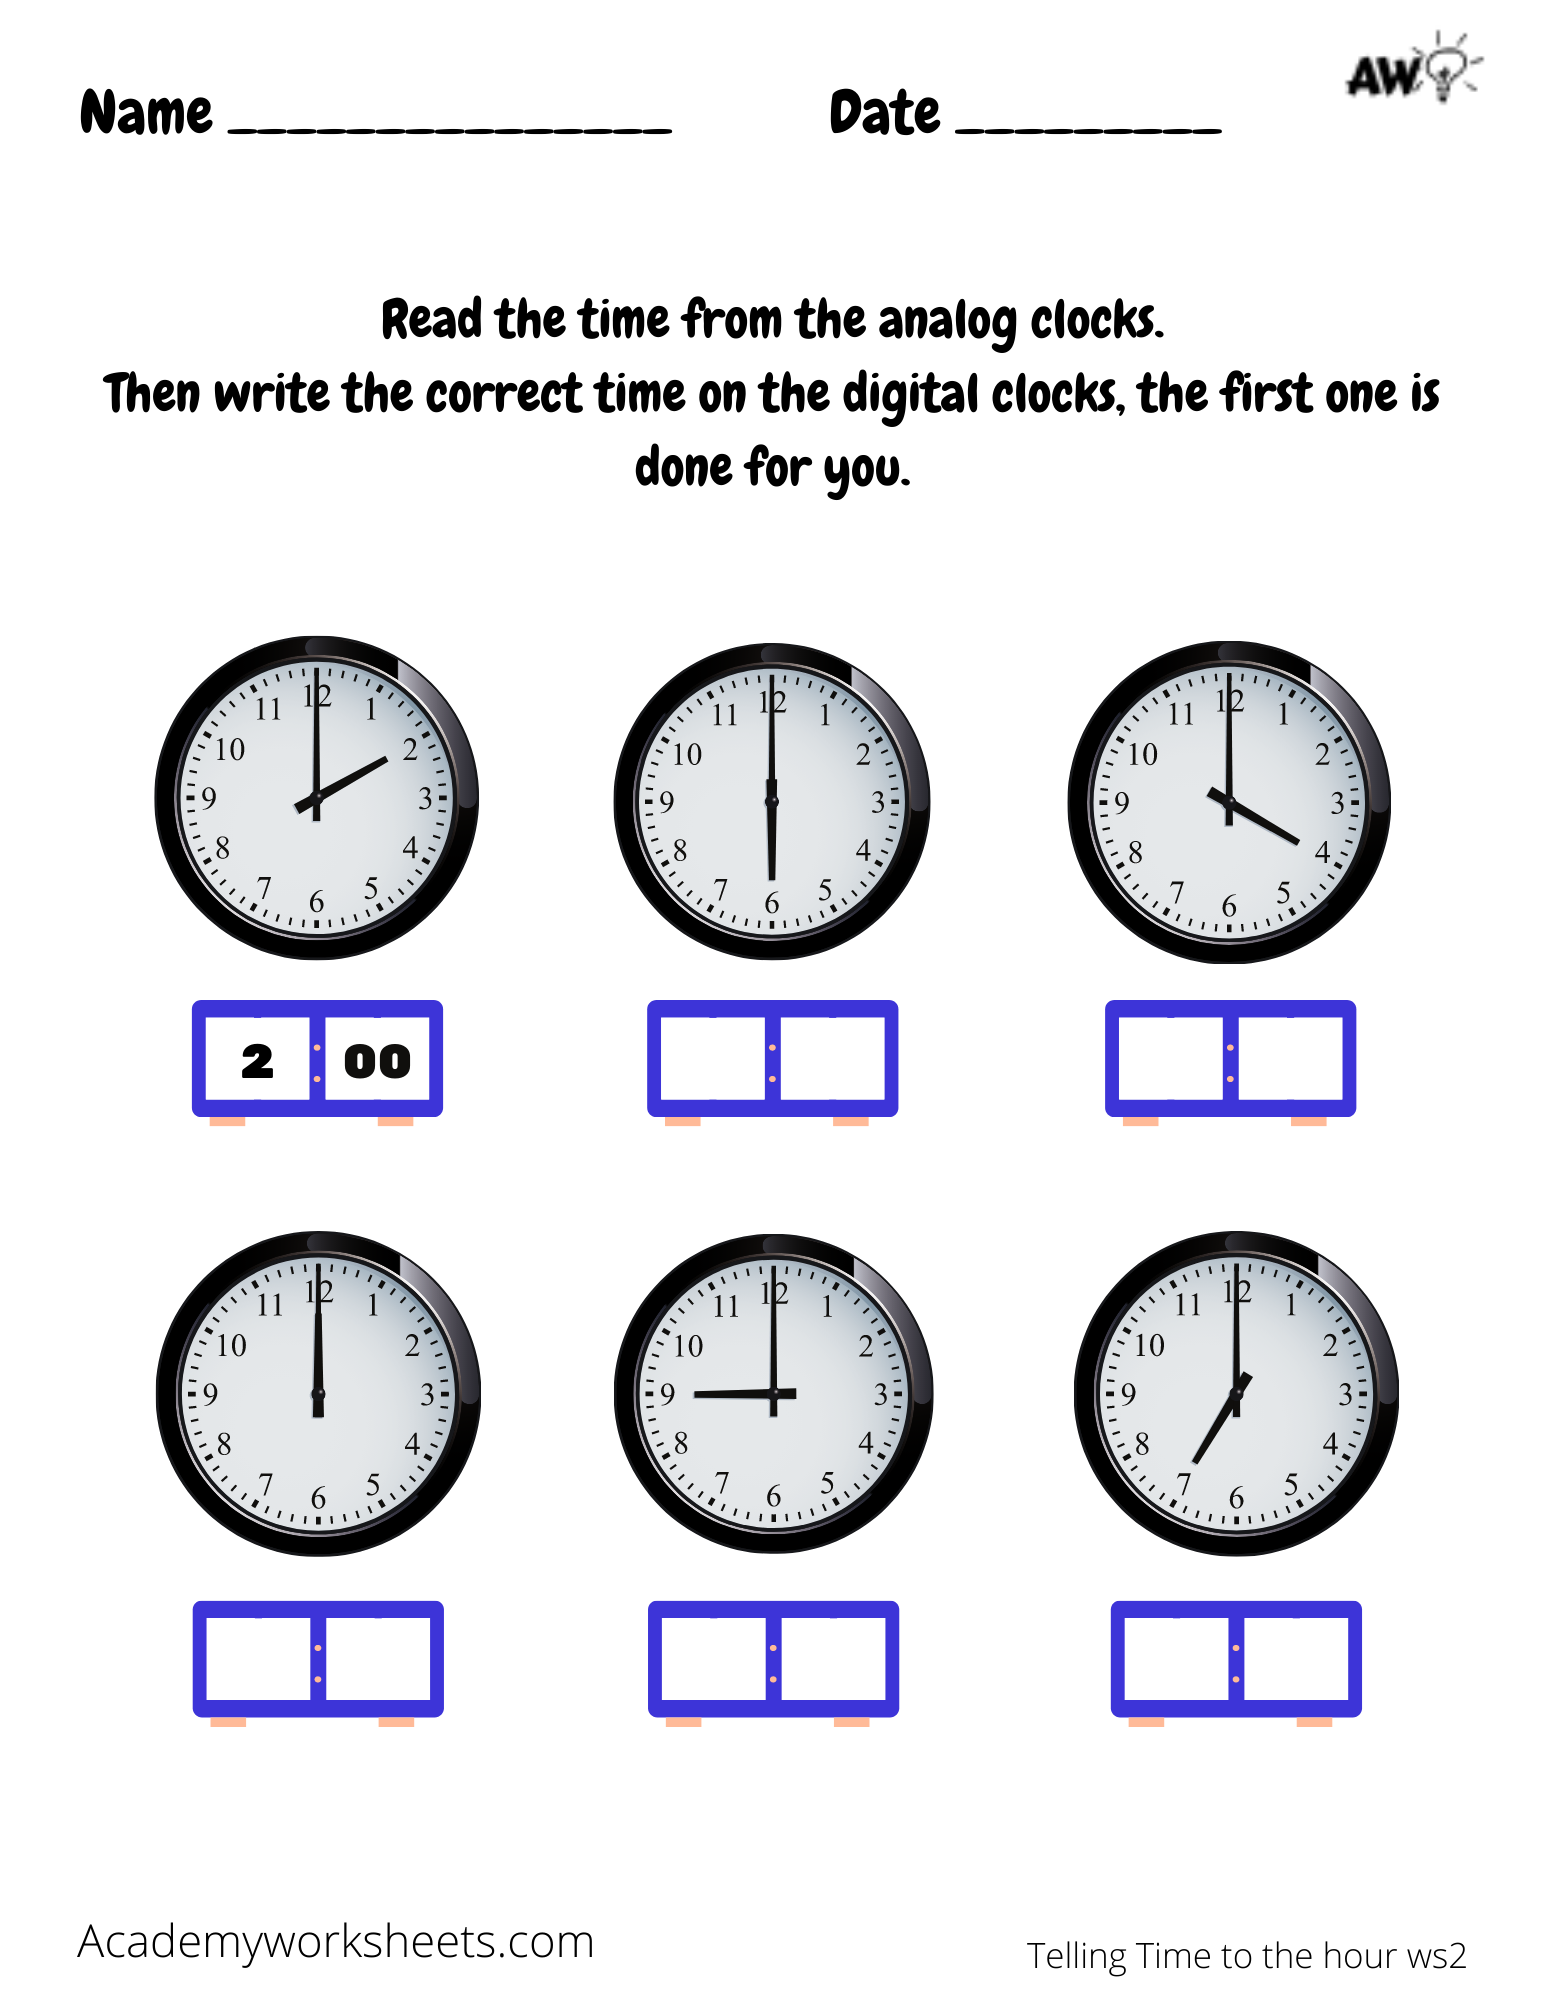 How to Tell Time (Without a Watch or Clock)